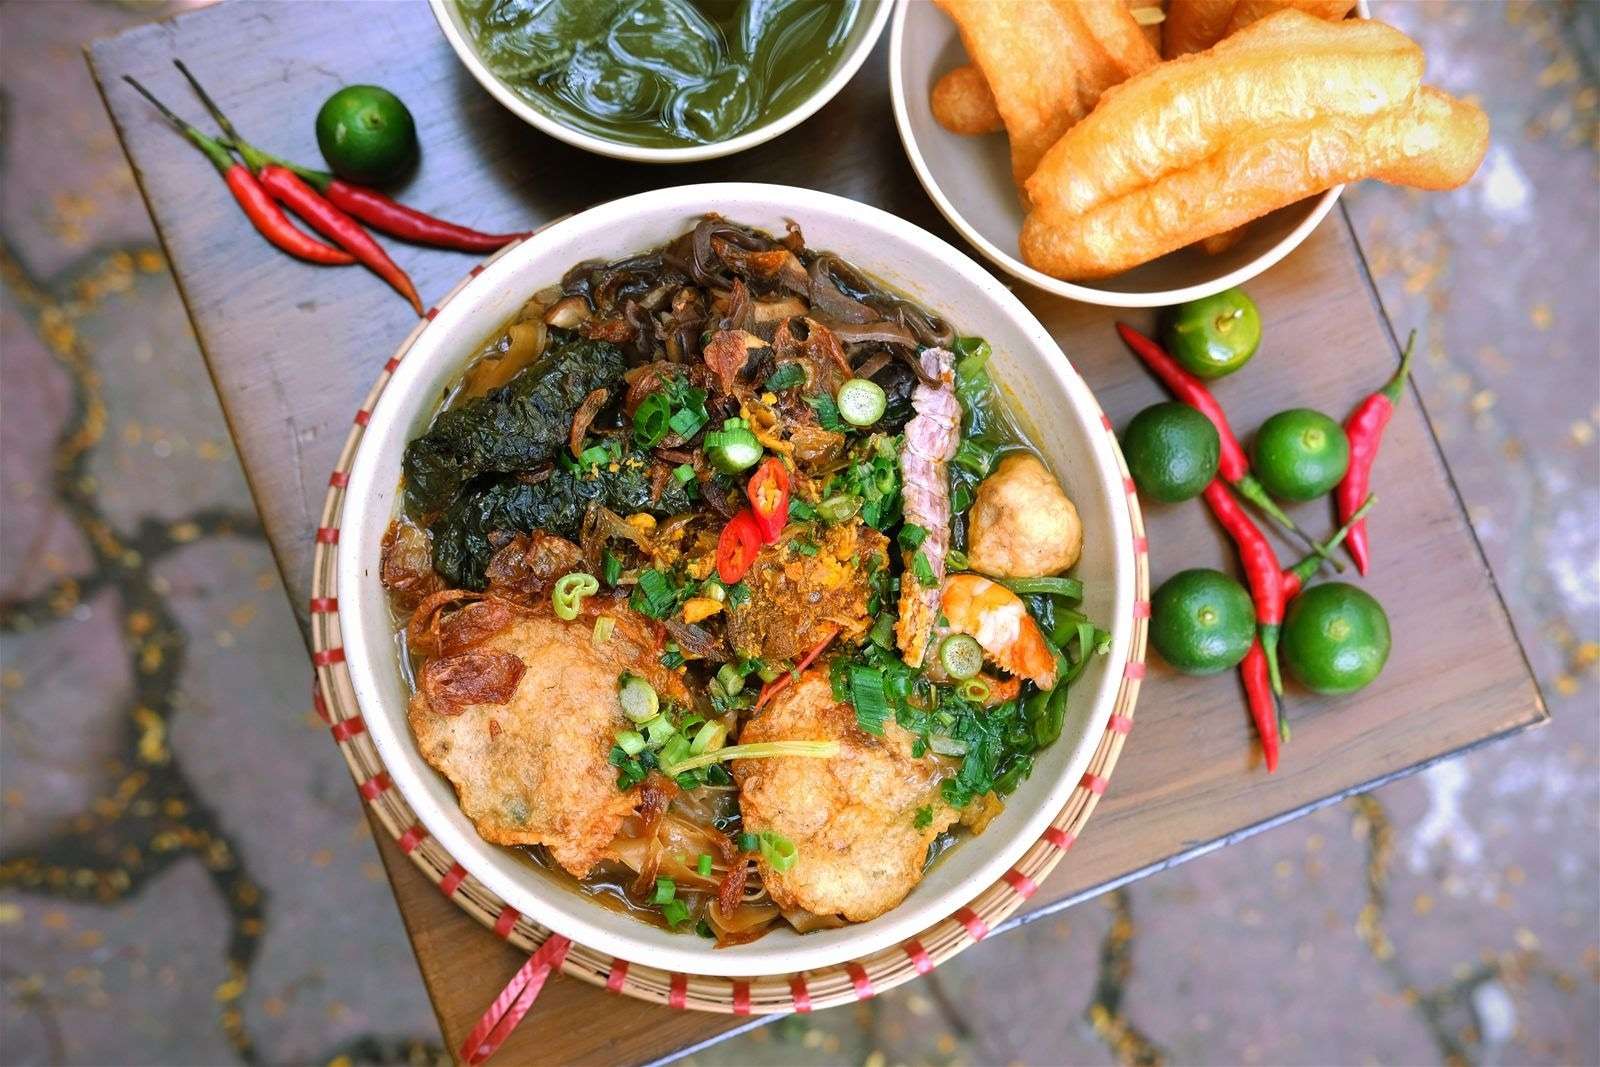 What to eat in Hải Phòng?